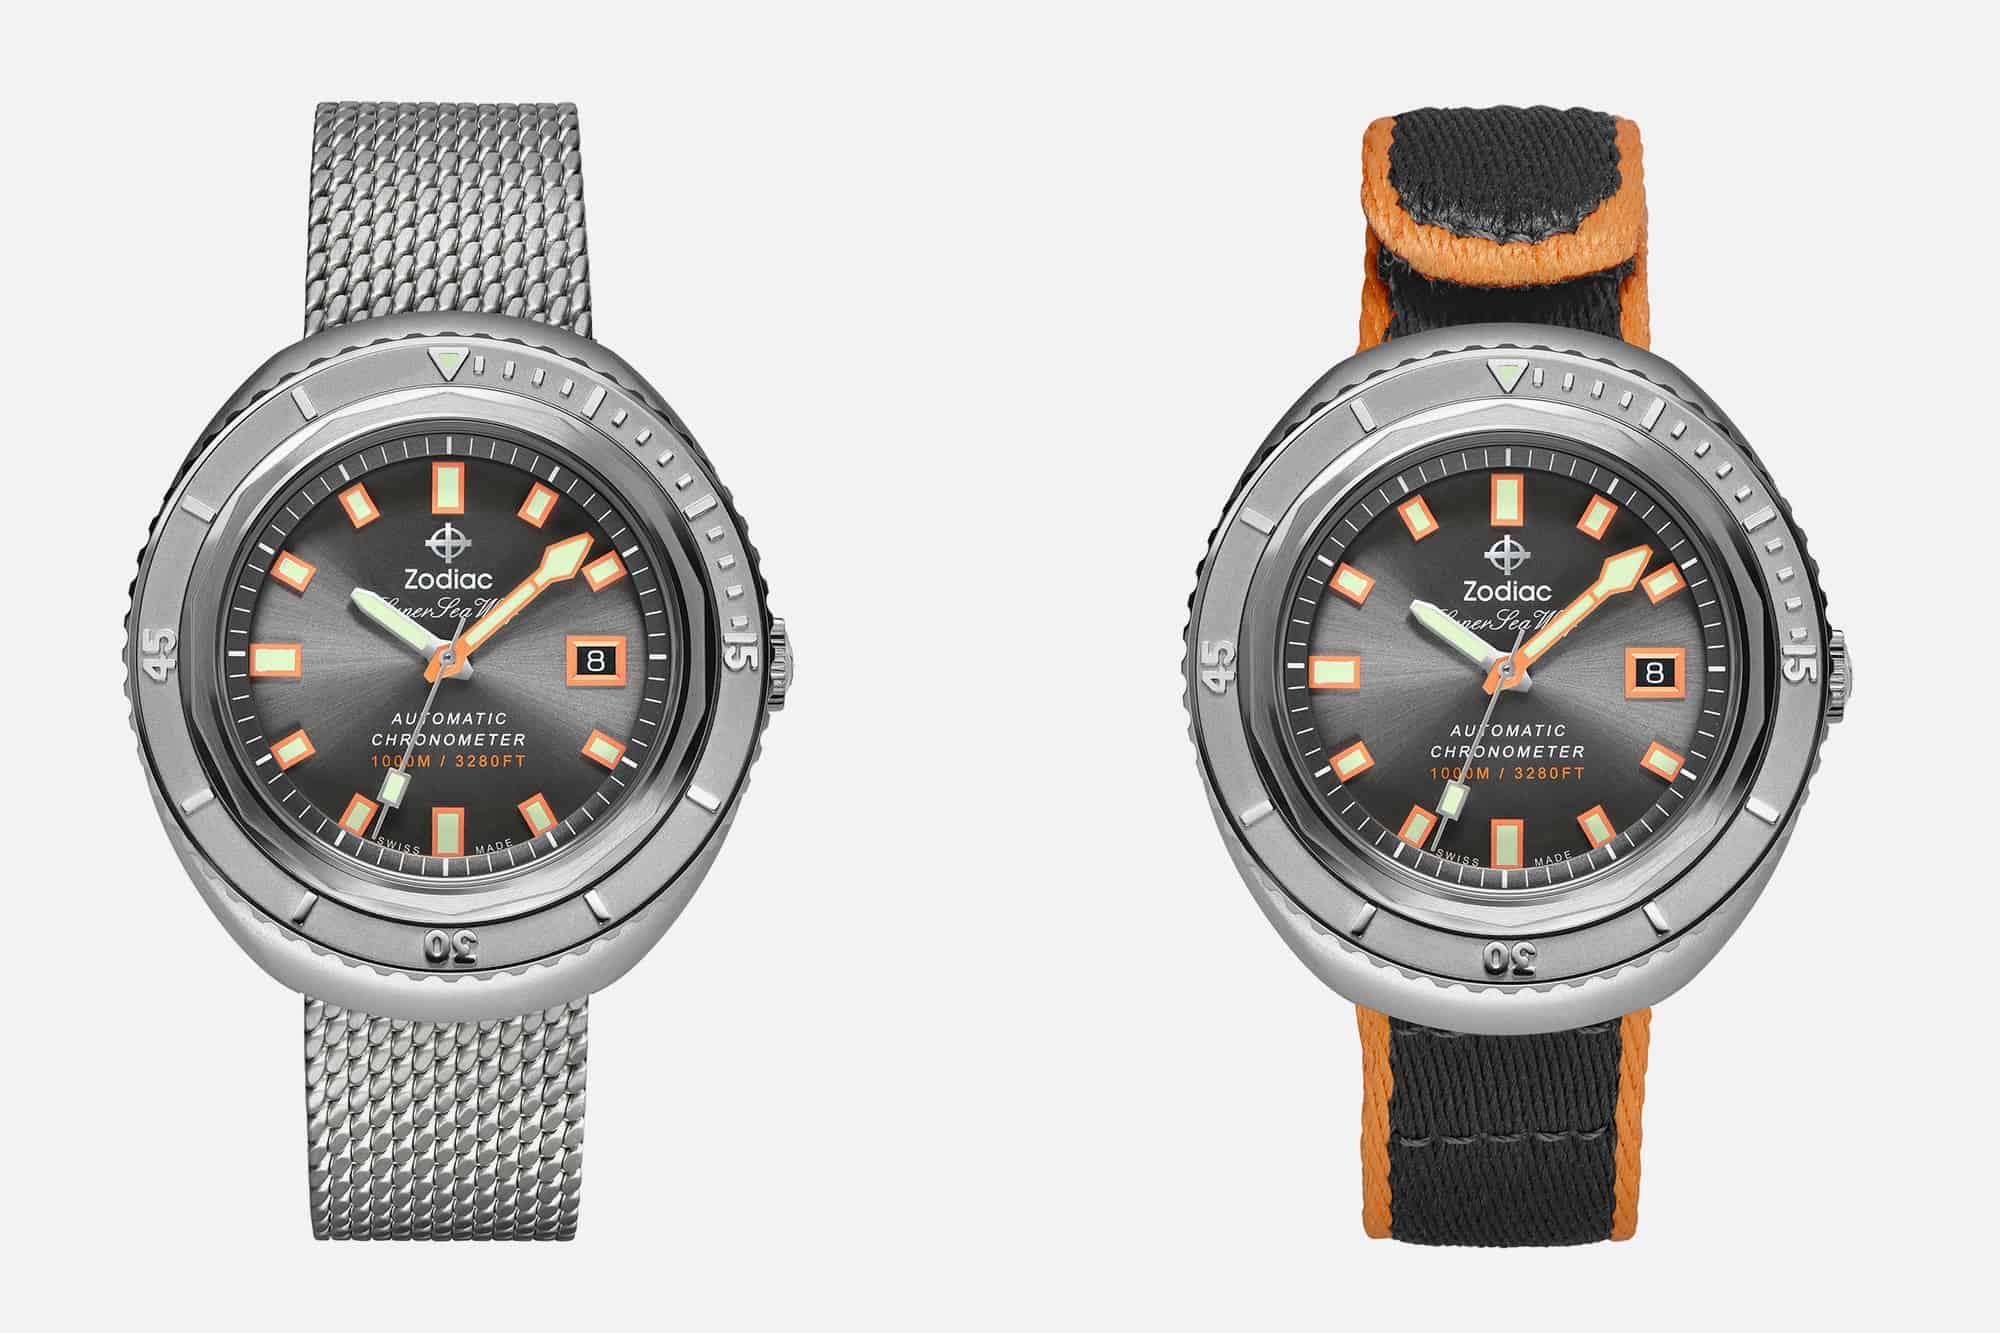 Introducing the Zodiac Super Sea Wolf 68 Limited Edition